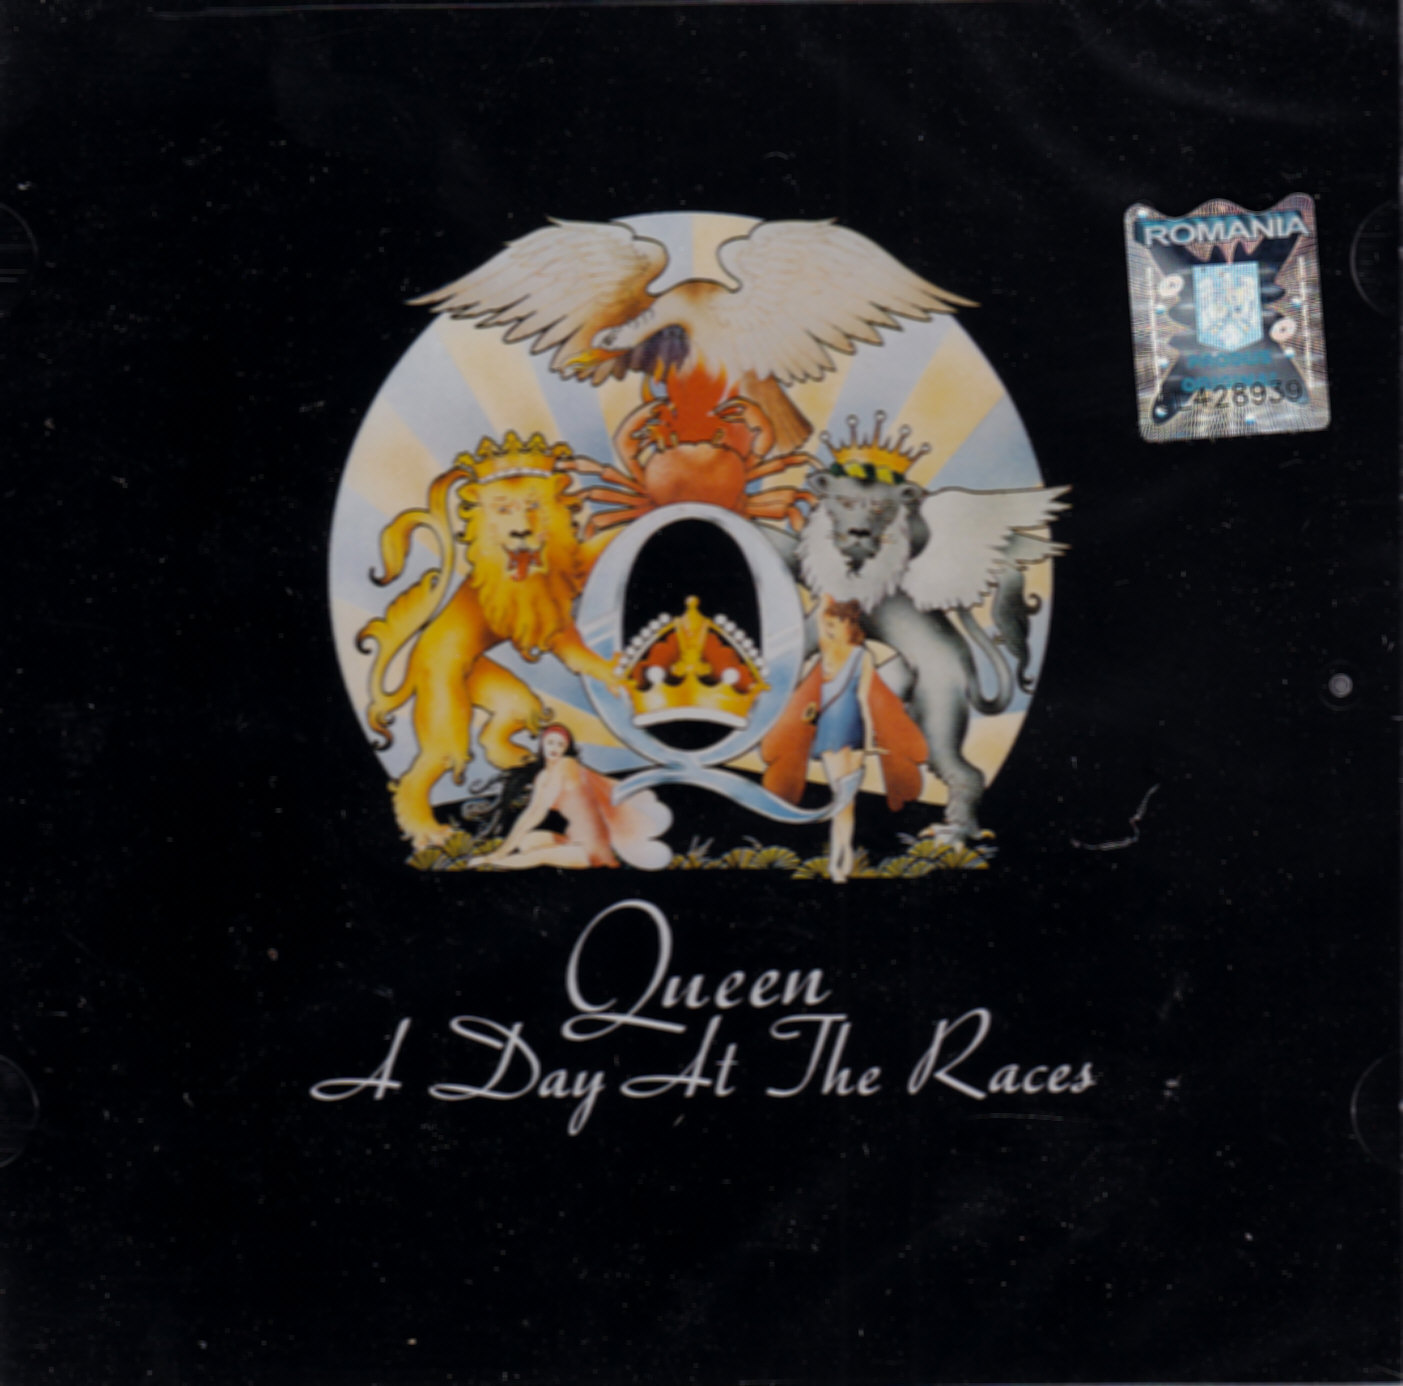 Cd Queen - A Day At The Races - 2011 Digital Remaster